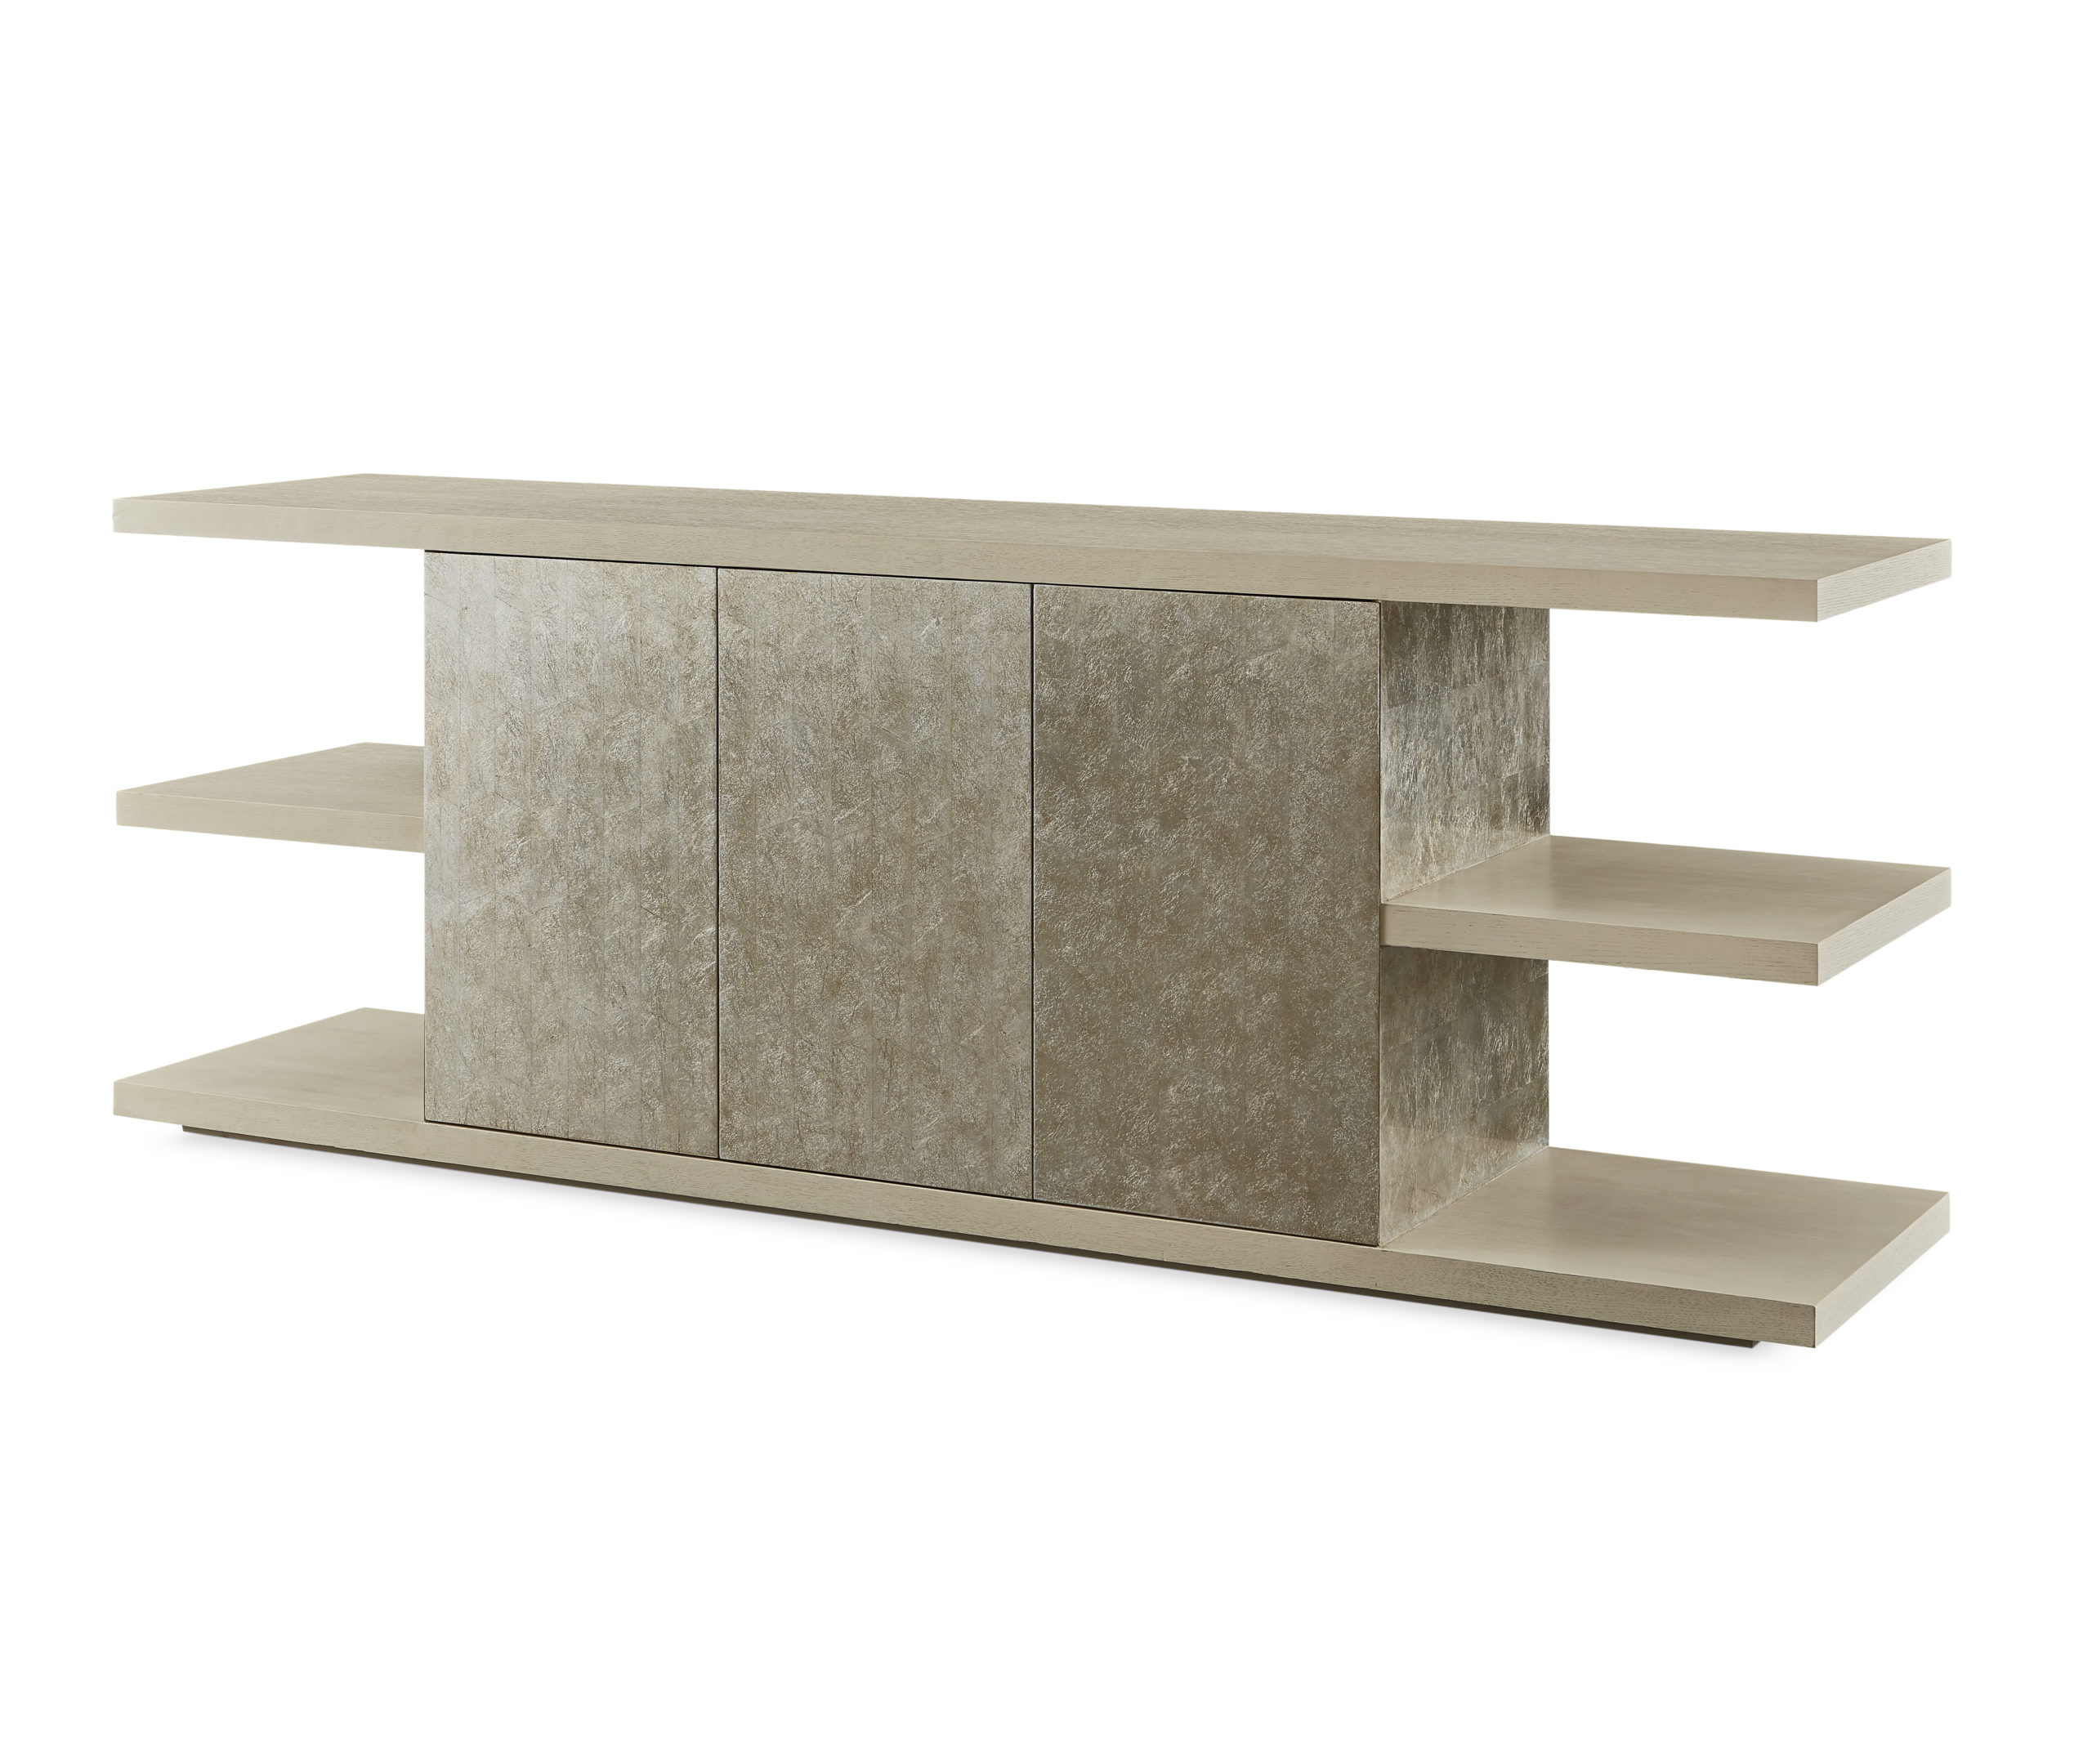 Baker_products_WNWN_hollis_media_console_BAA3064_FRONT_3QRT-scaled-2